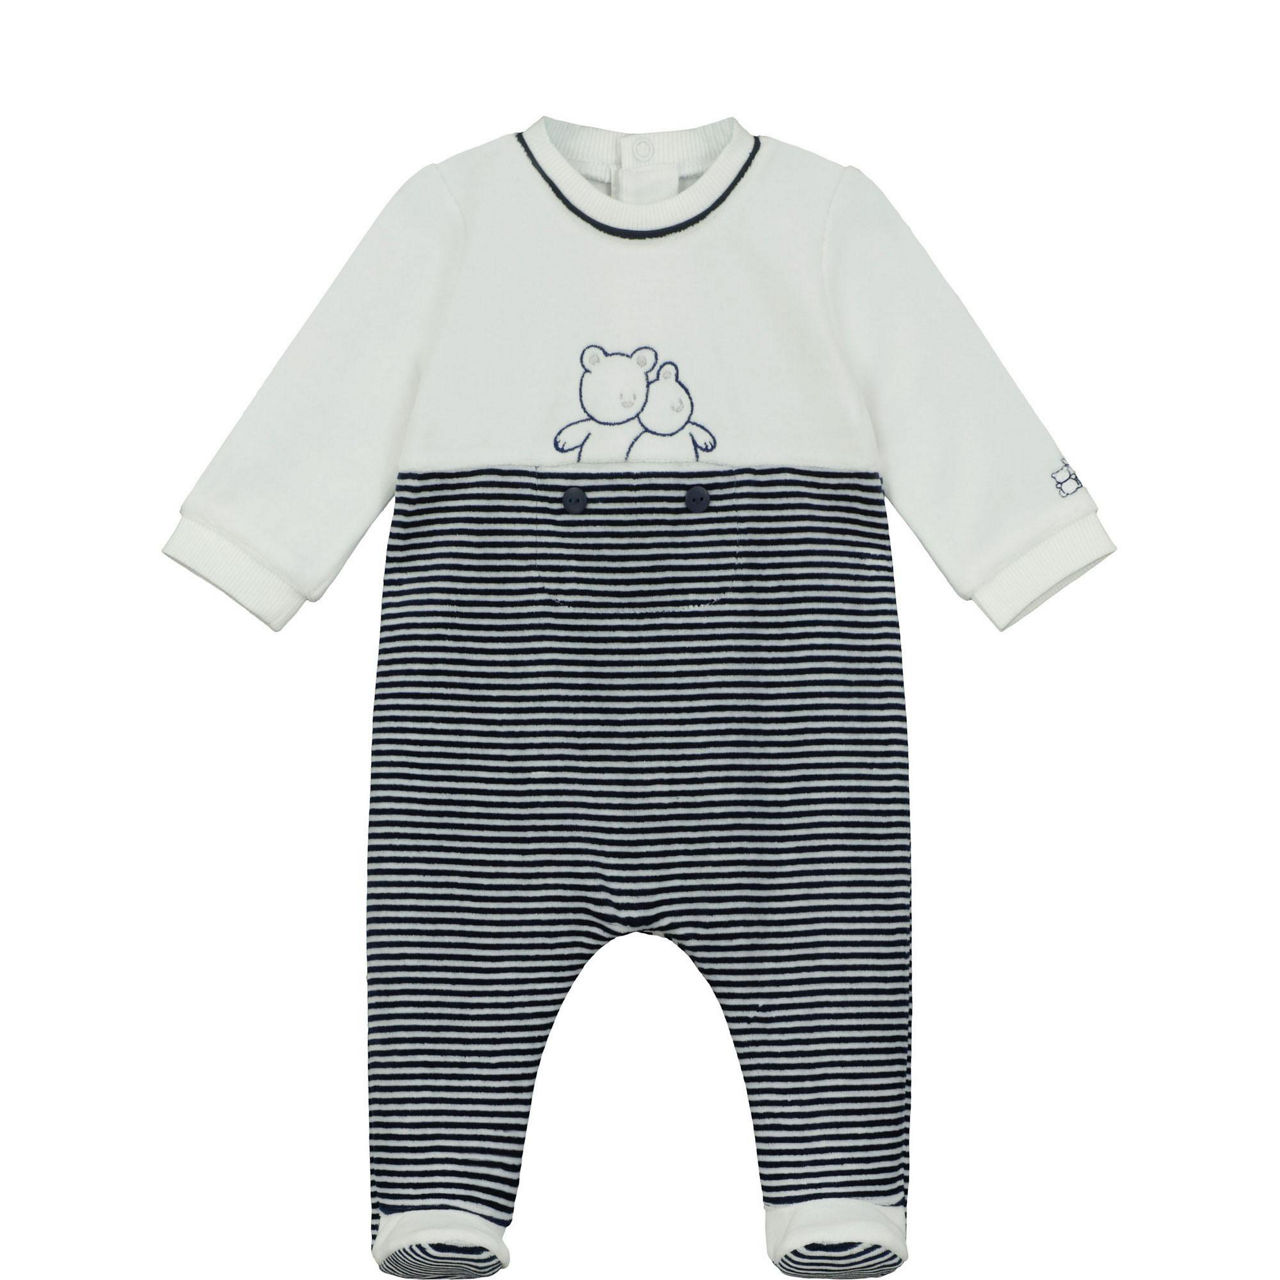 Emile et Rose  Traditional Baby Clothes for Newborn to 23 Months